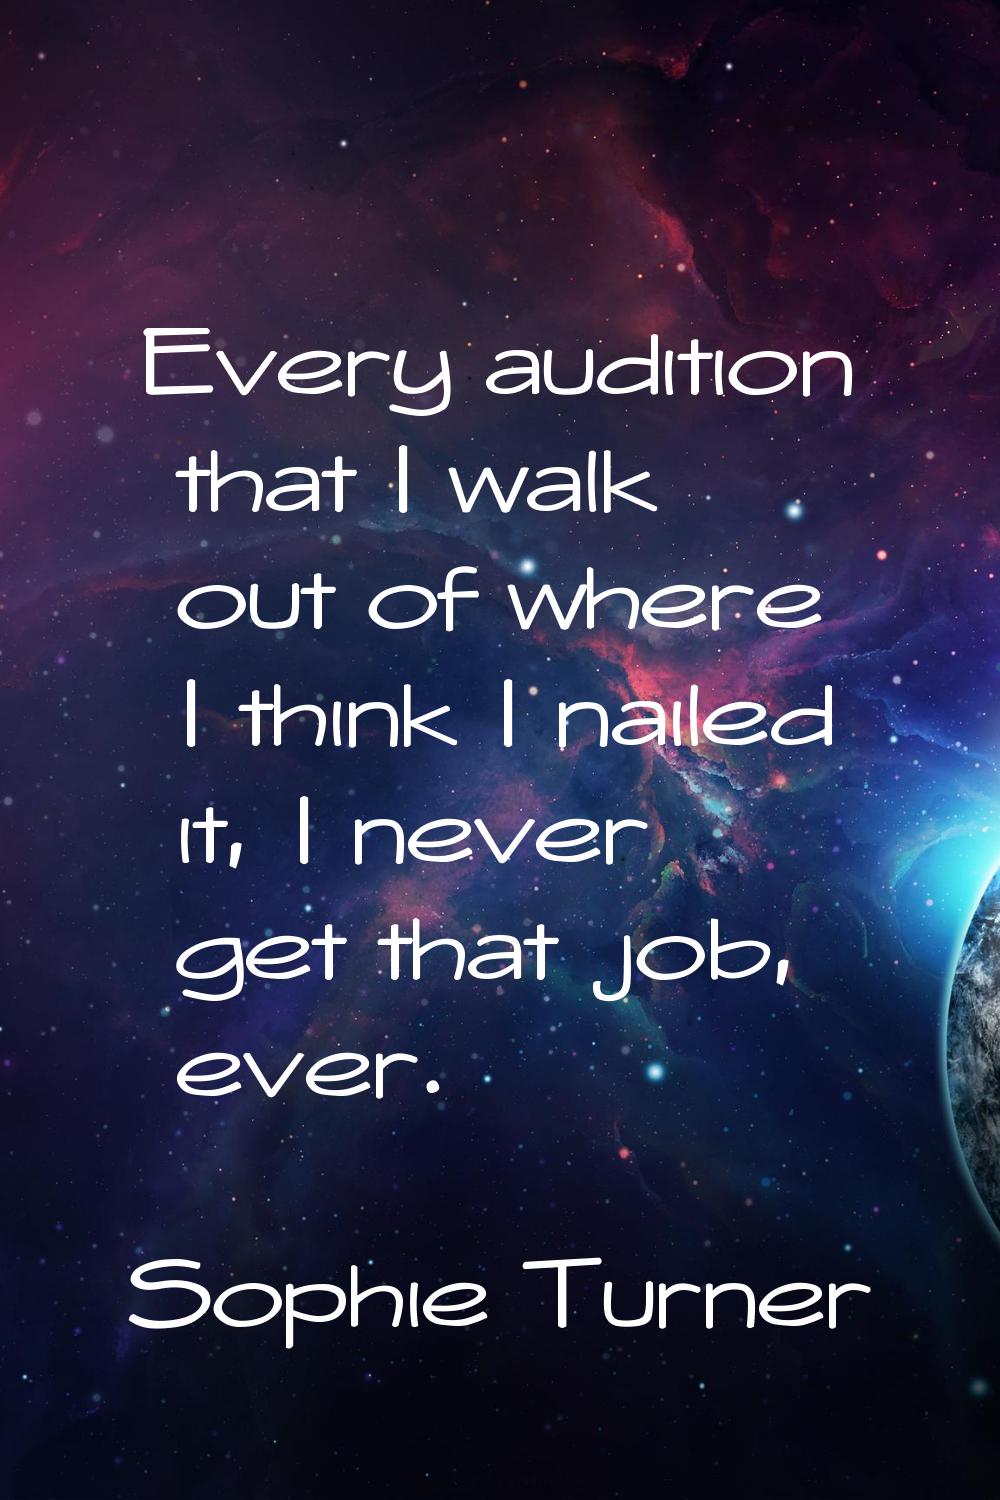 Every audition that I walk out of where I think I nailed it, I never get that job, ever.